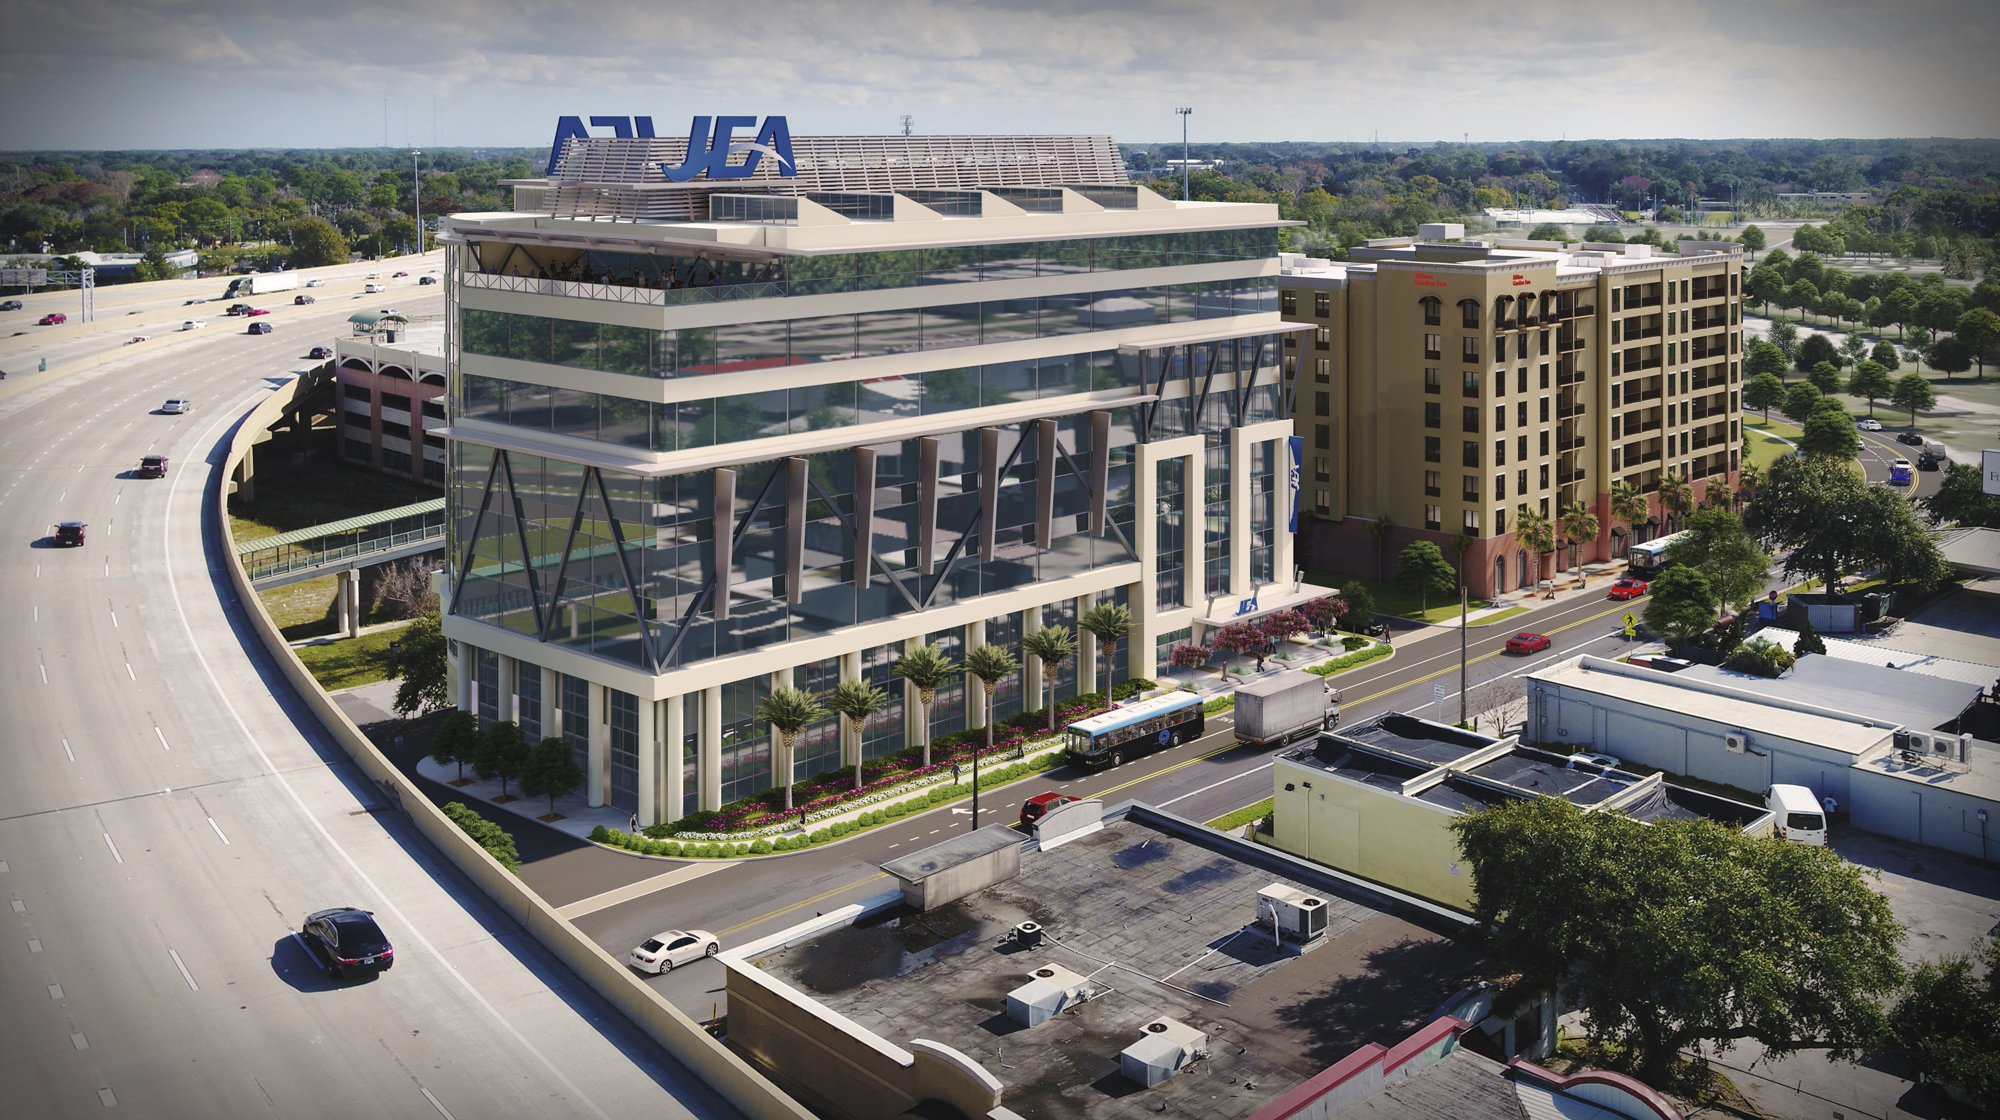 Balanky’s Chase Properties proposed the Kings Avenue site for the new JEA headquarters, but the utility chose a location near the Duval County Courthouse.